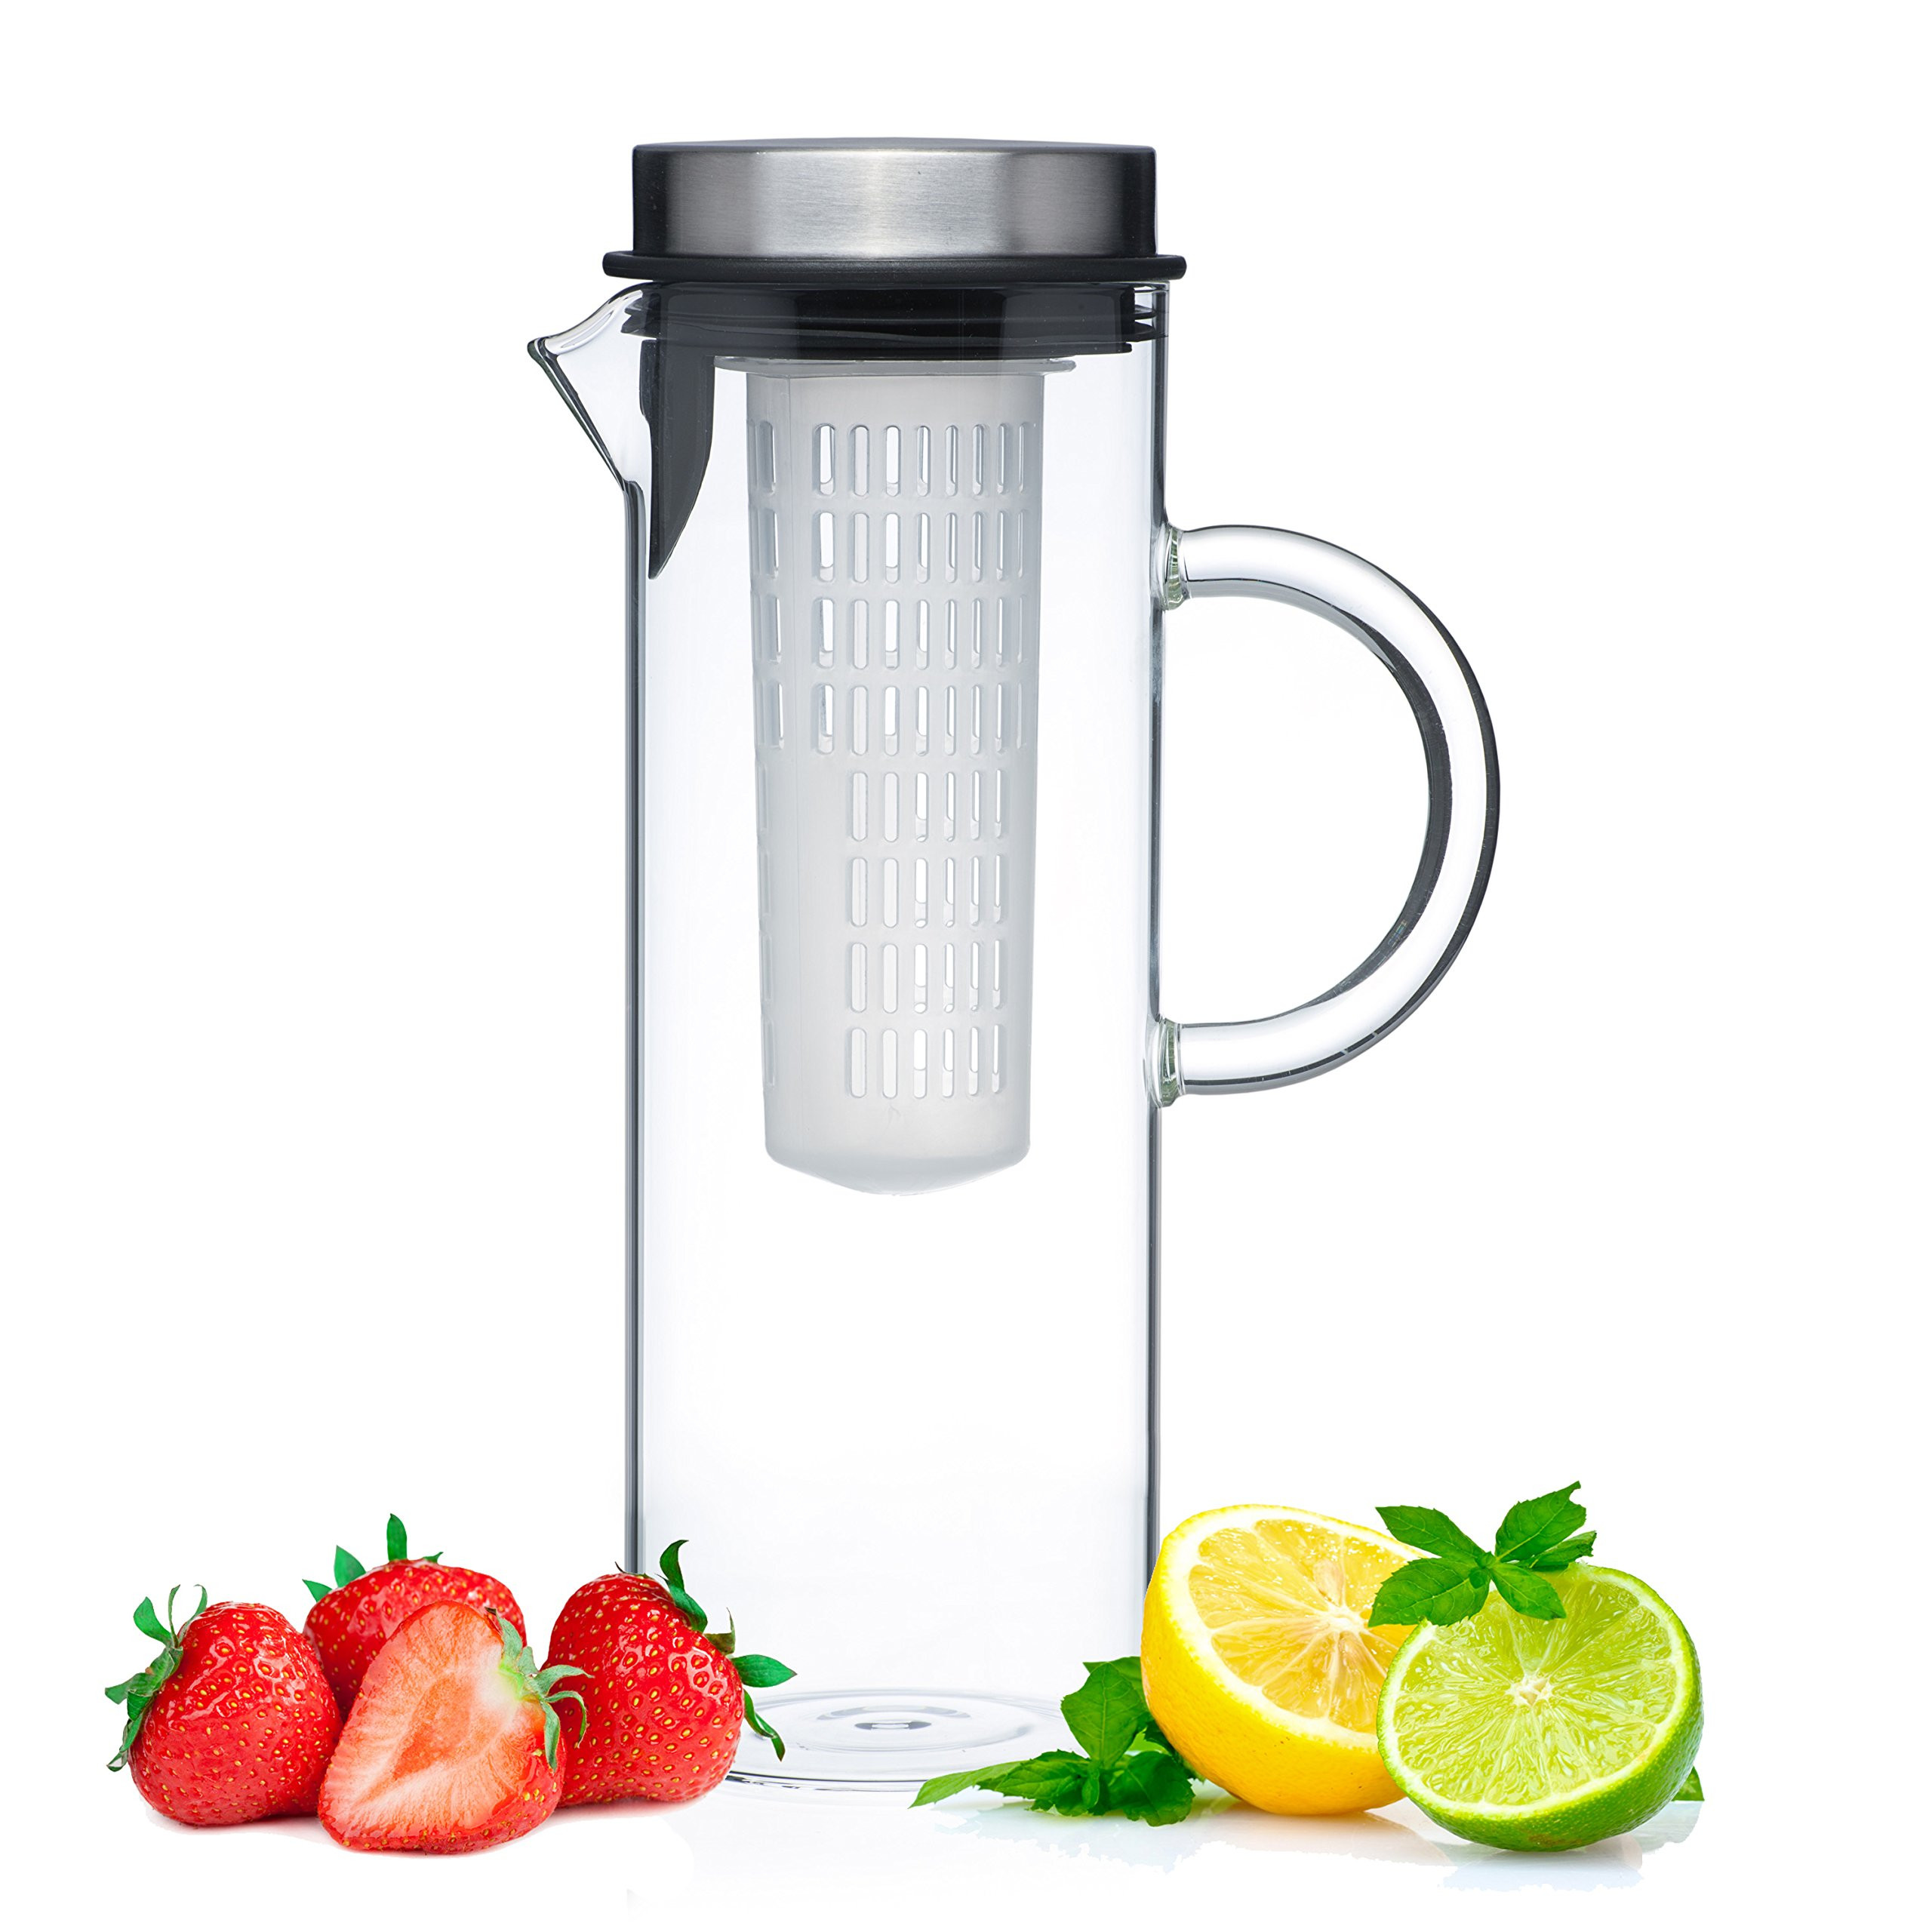 28 Lovable Sugar Mold Glass Vase Inserts 2023 free download sugar mold glass vase inserts of best rated in iced tea pitchers helpful customer reviews amazon com intended for glass water pitcher with lid fruit infuser rod borosilicate glass carafe w u